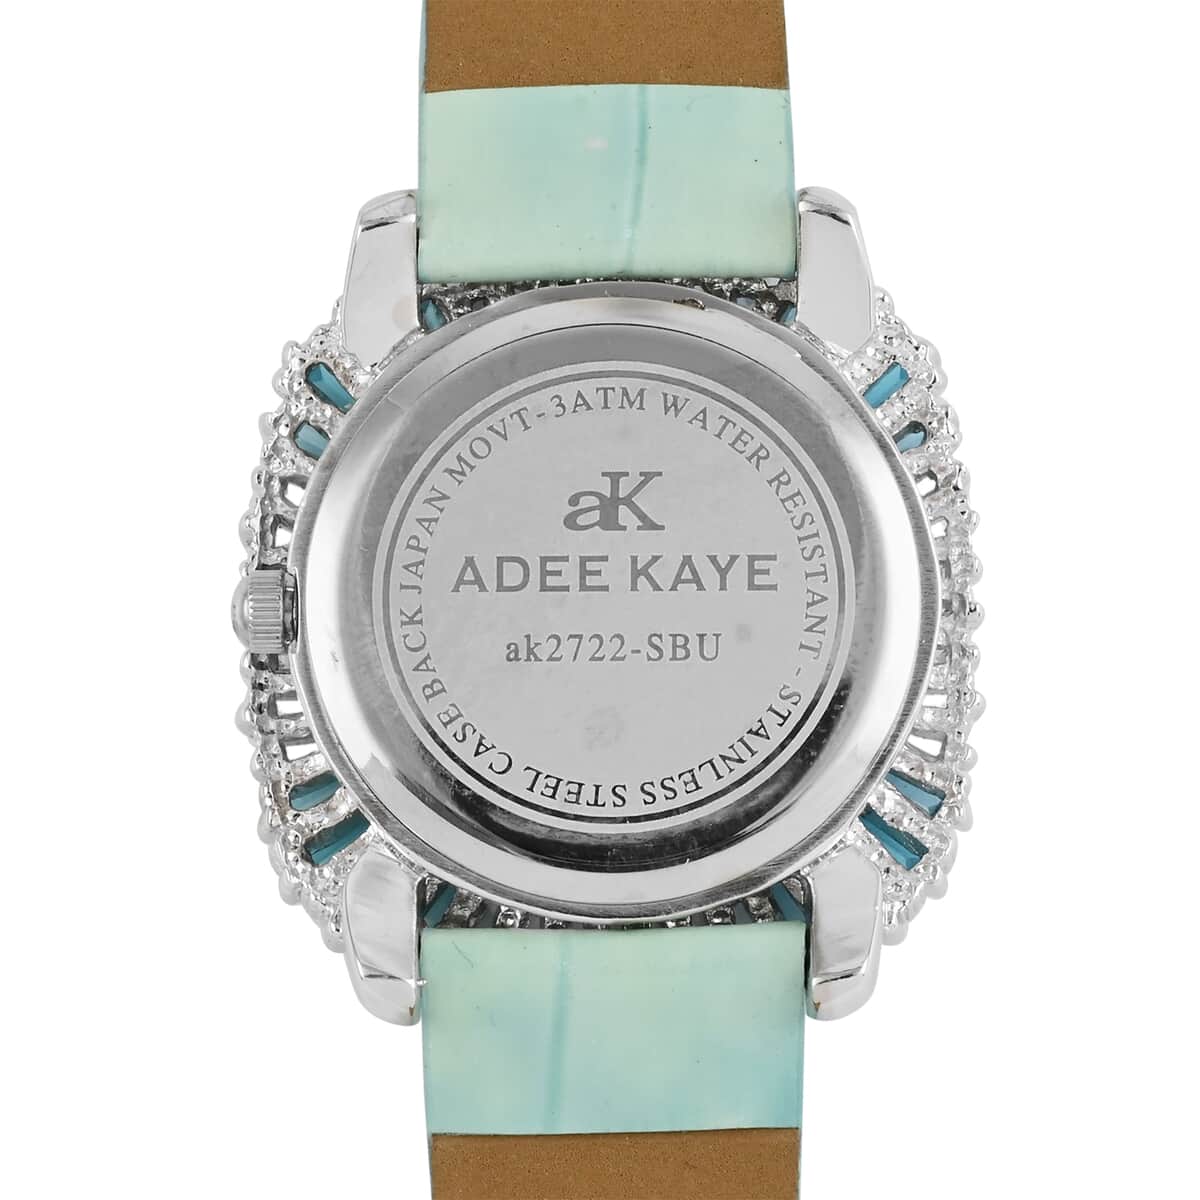 ADEE KAYE Austrian Crystal Japan Quartz Movement MOP Dial Watch in Blue Leather Band (36 mm) image number 4